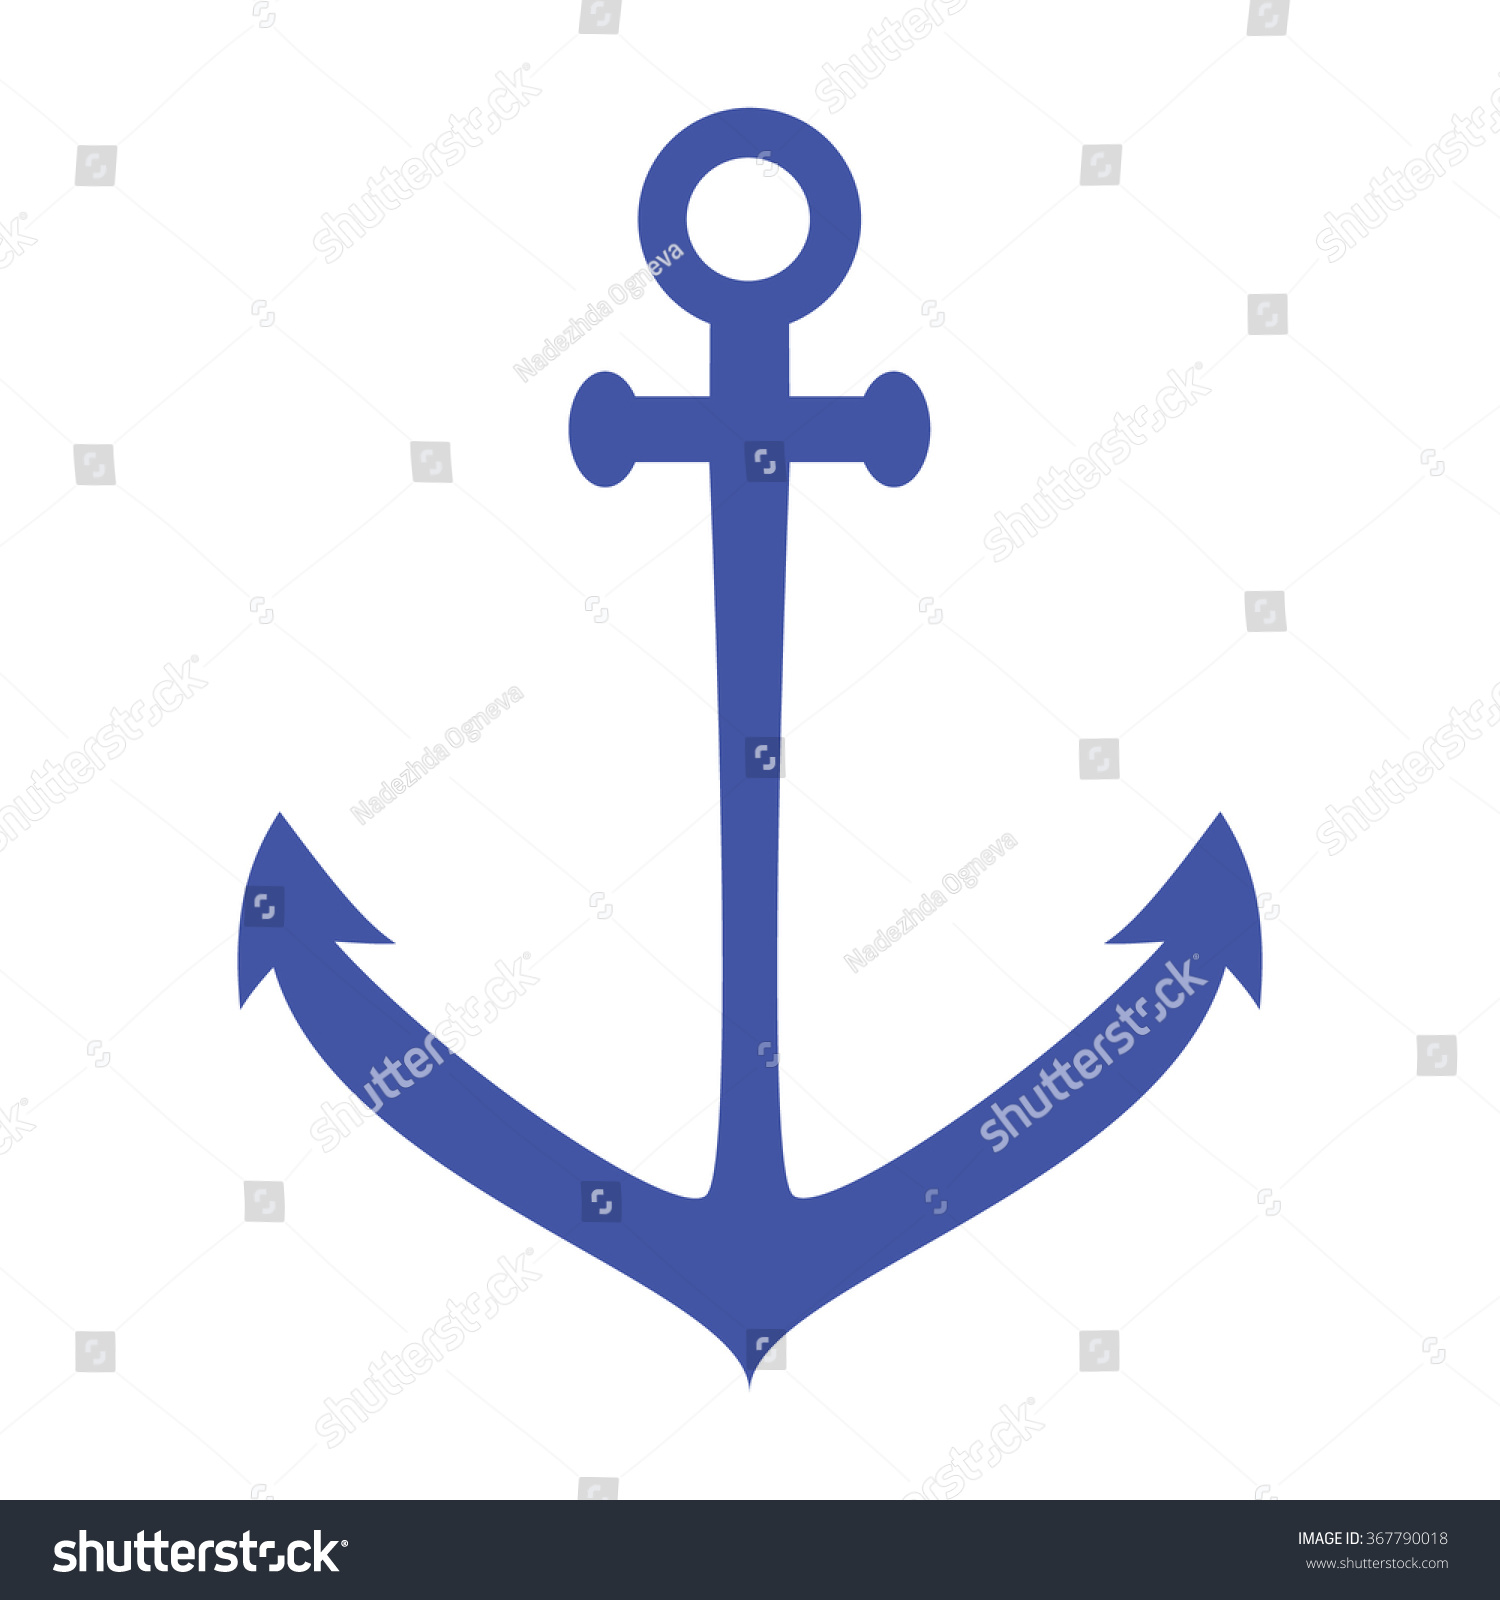 anchor clipart no background - photo #9